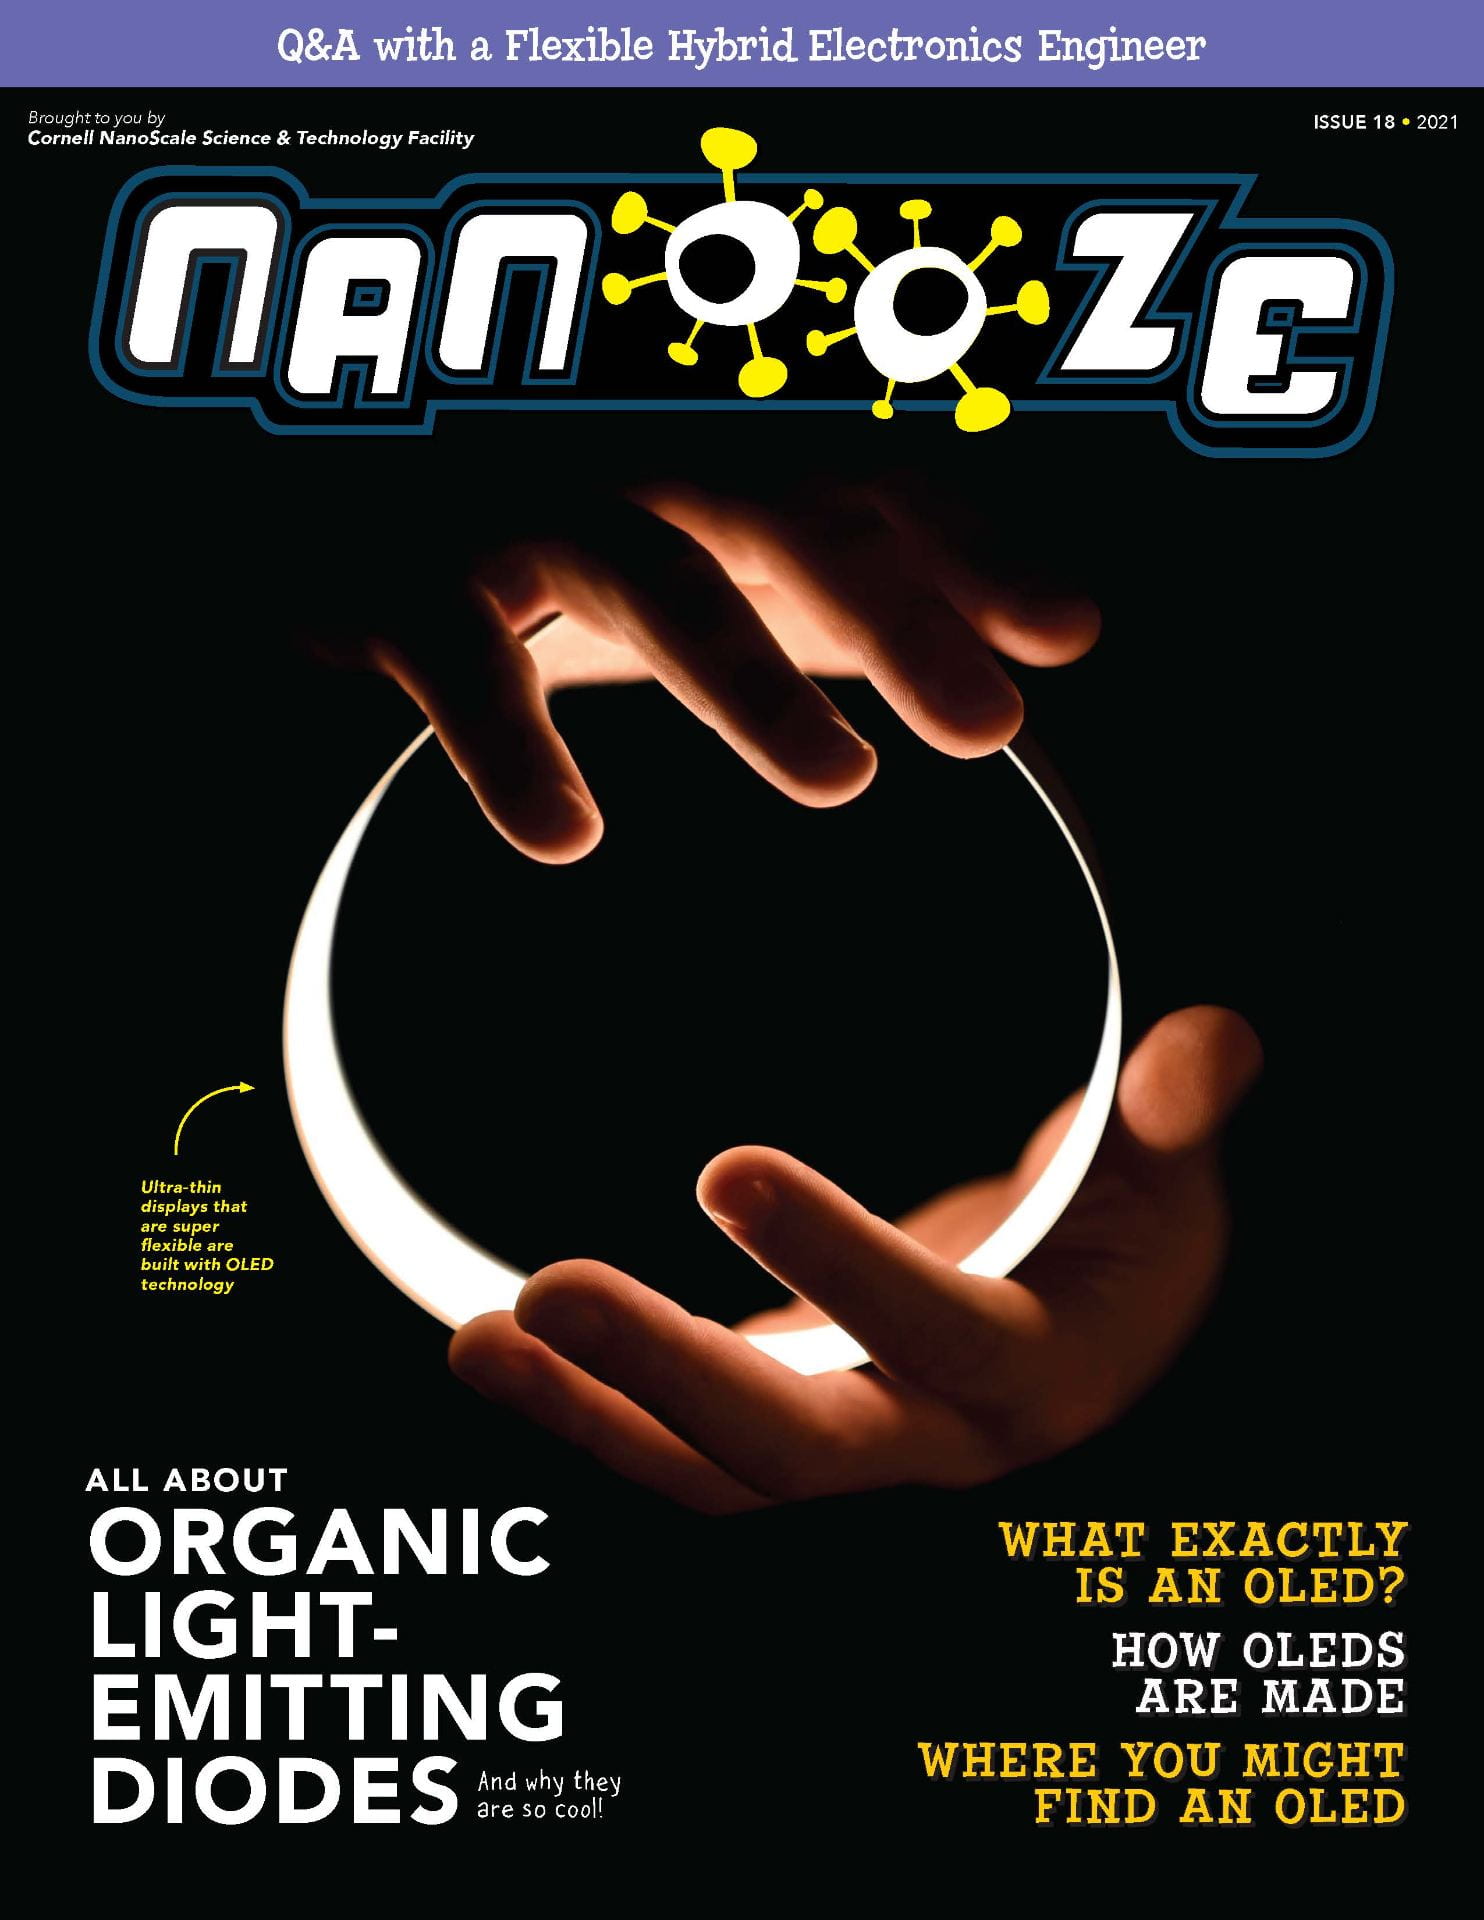 Issue 18: All About Organic Light Emitting Diodes